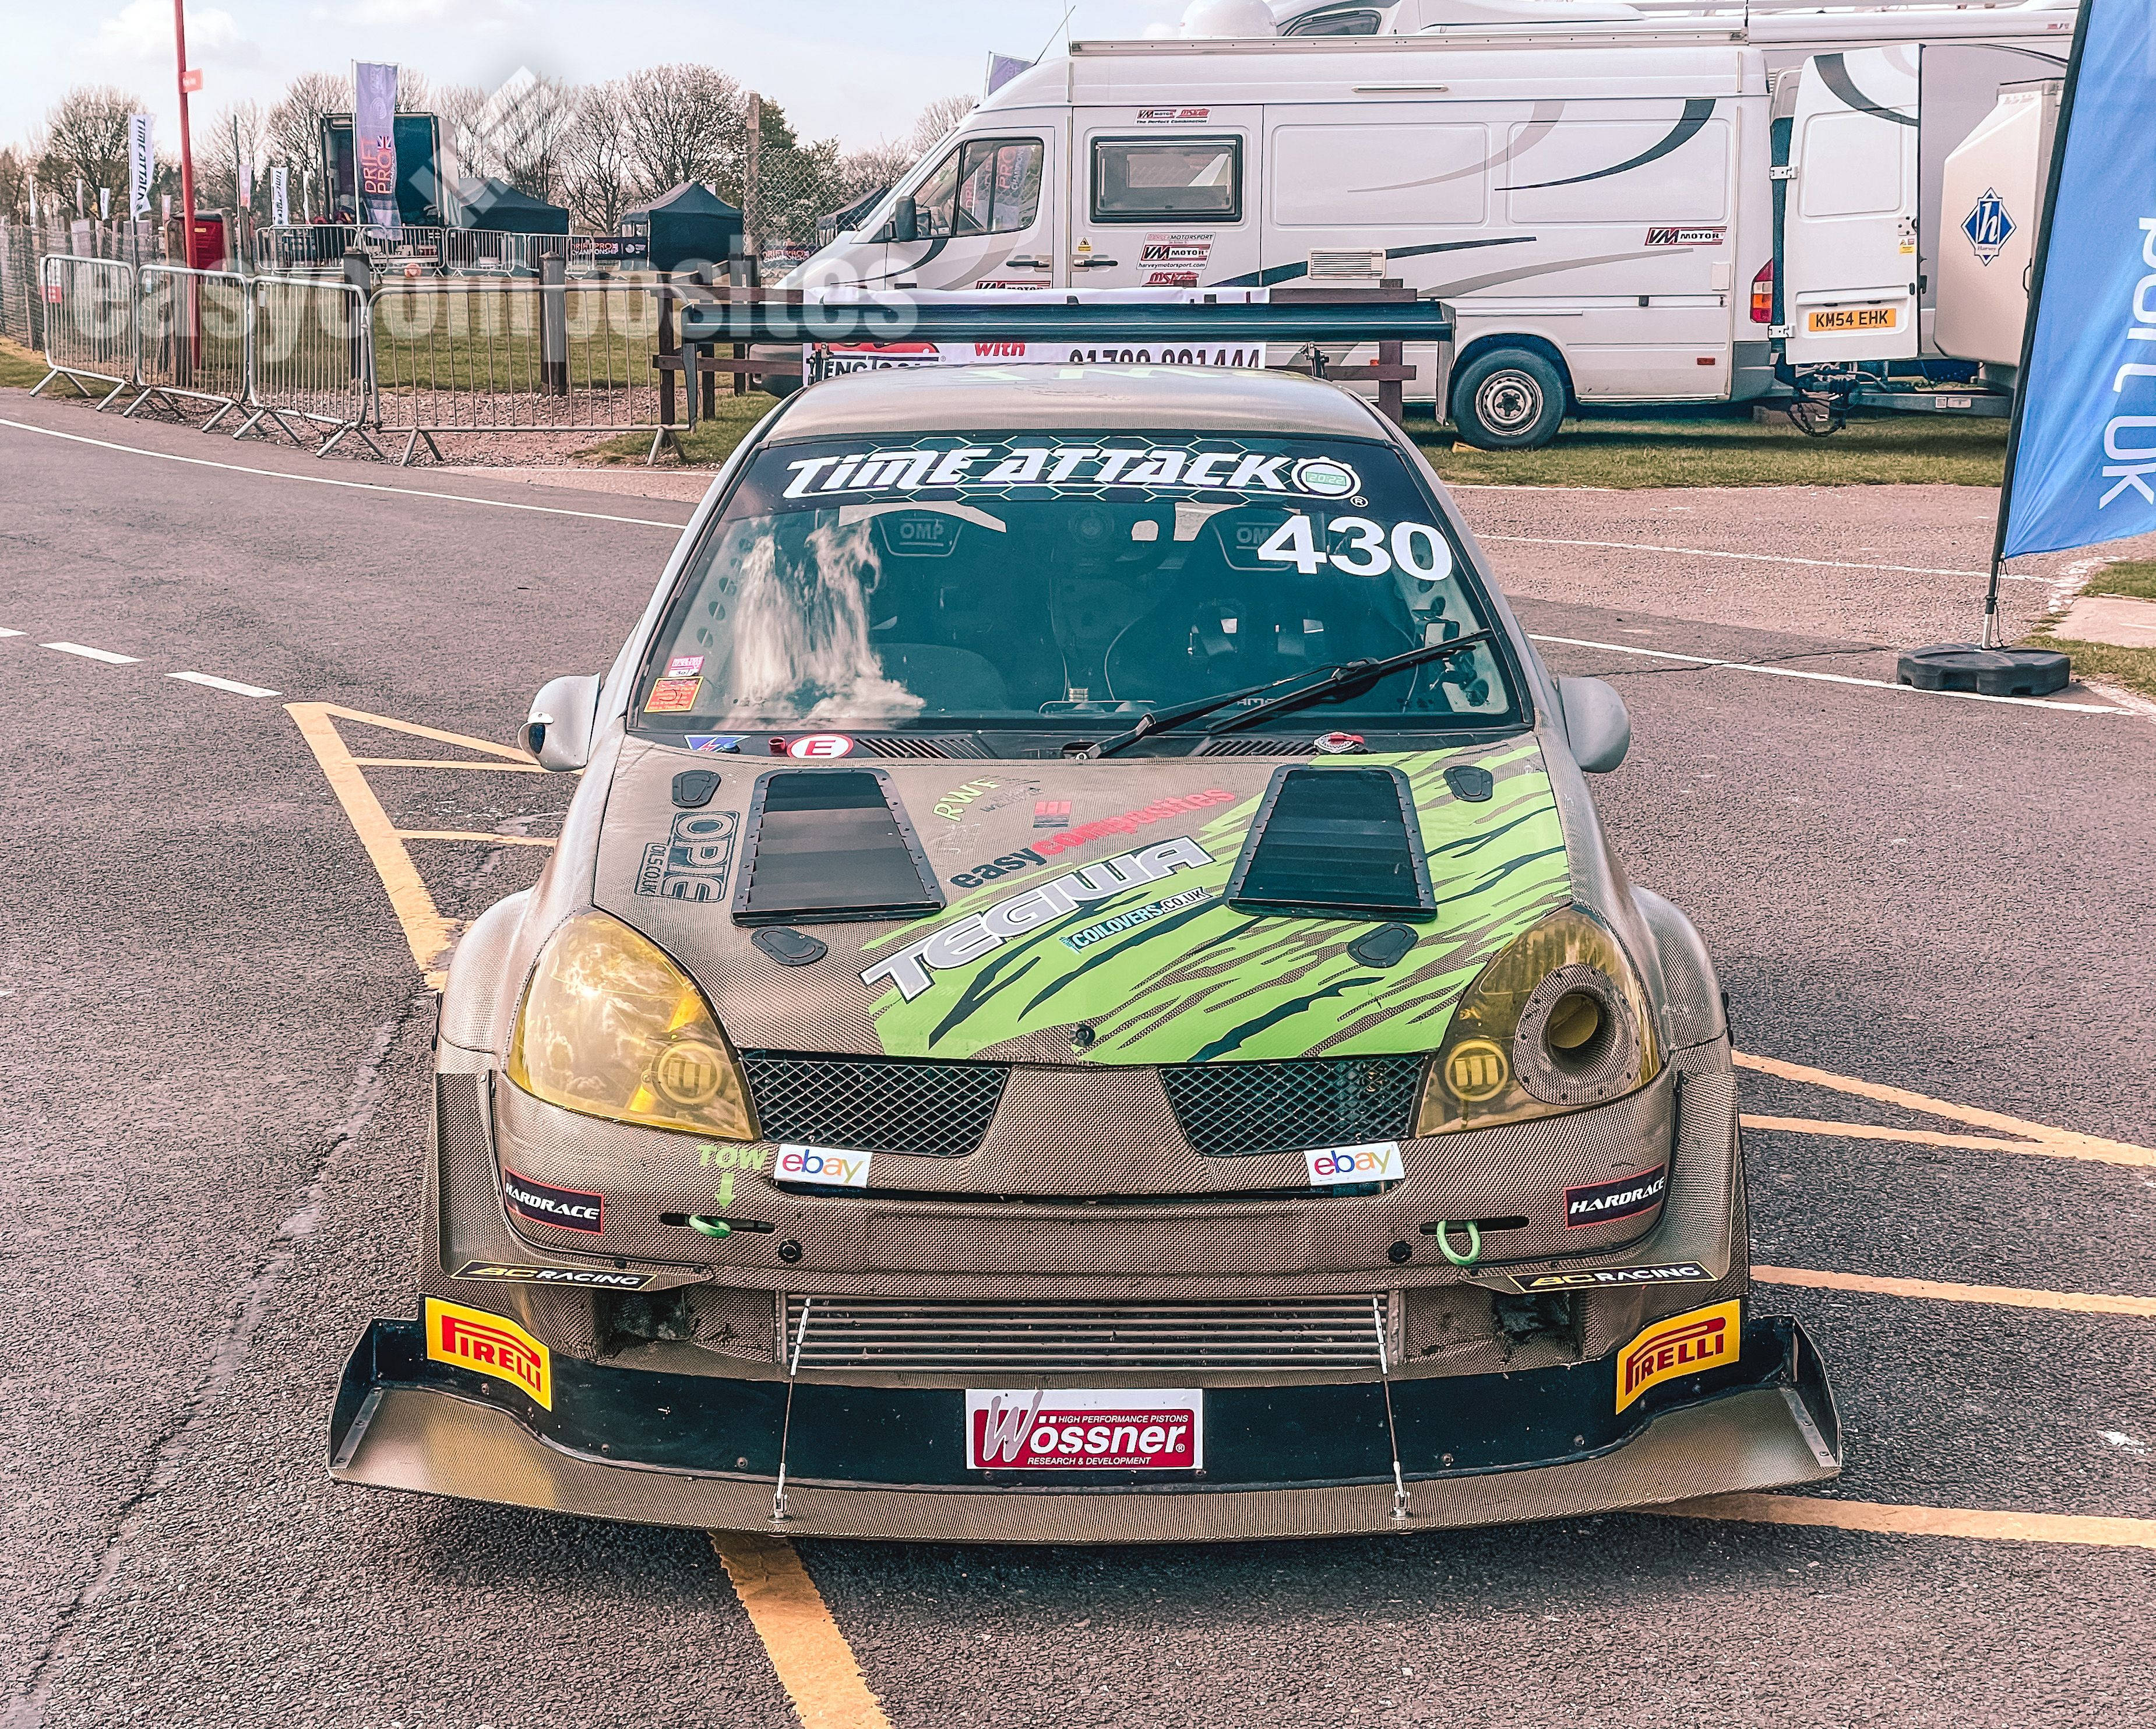 Carbon Kevlar bodied Time Attack Race Car - Easy Composites